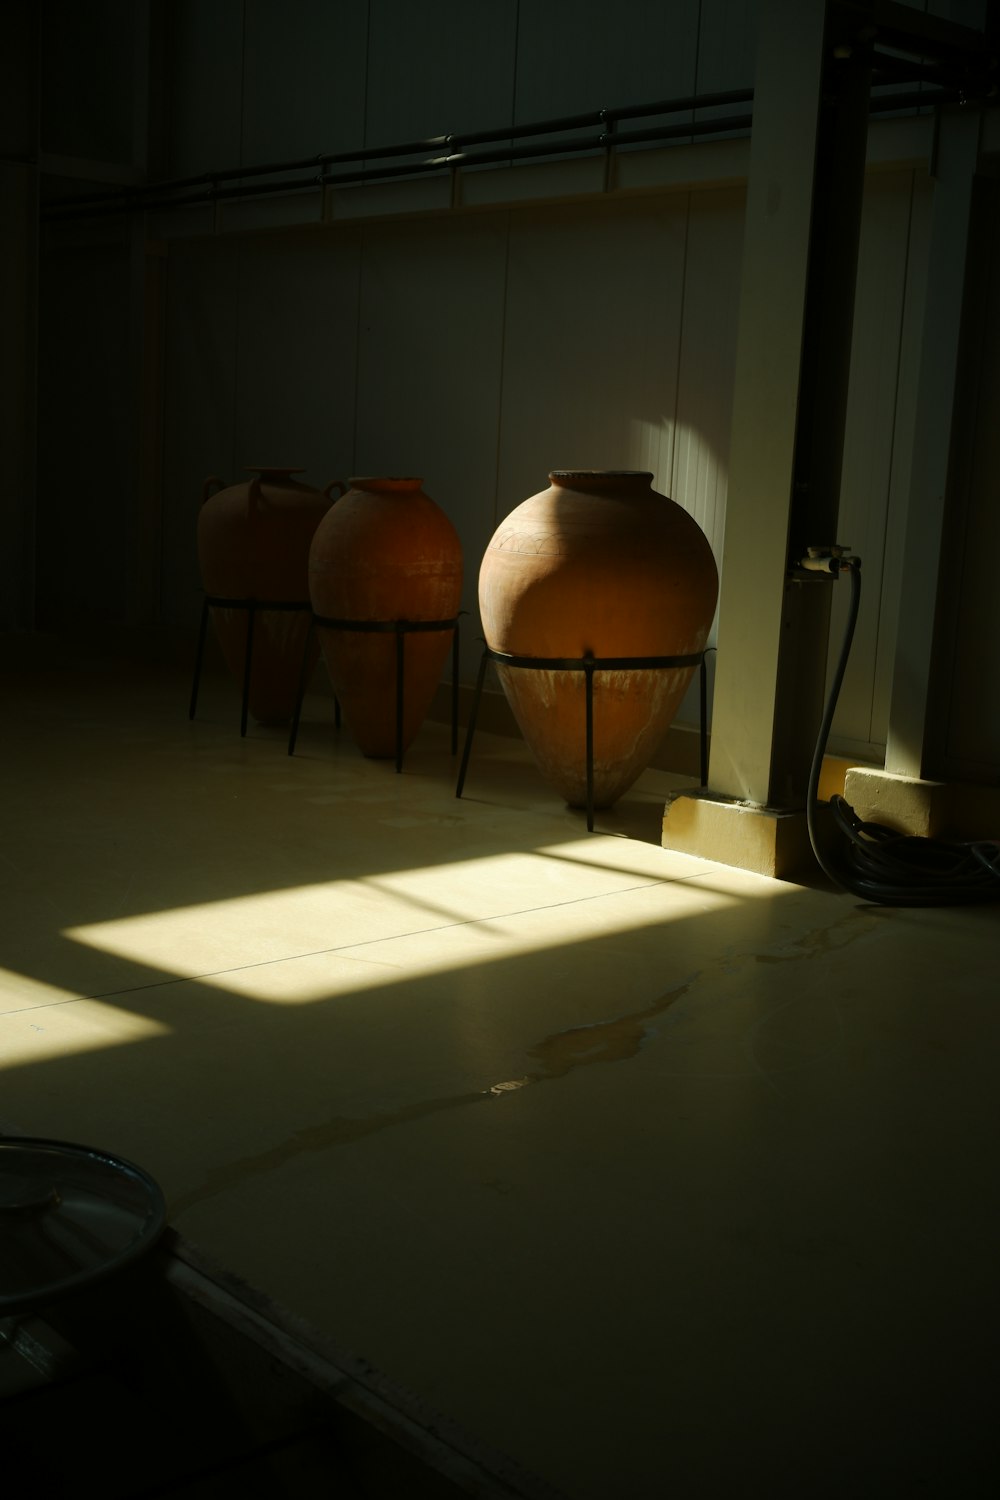 three large vases sitting in a dimly lit room